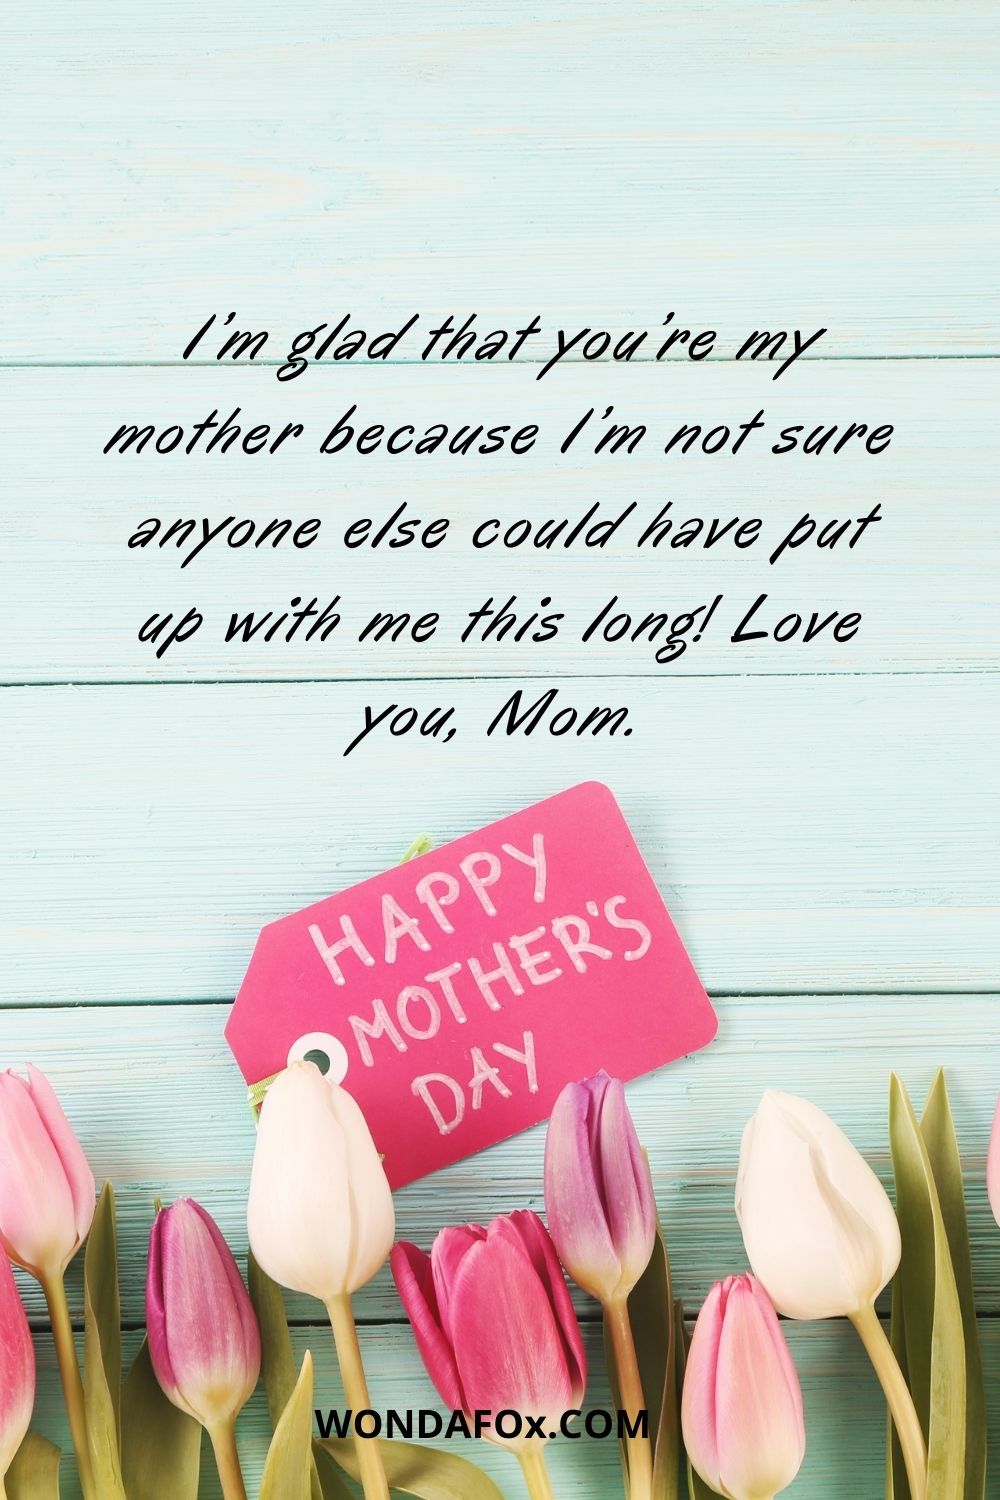 I’m glad that you’re my mother because I’m not sure anyone else could have put up with me this long! Love you, Mom.